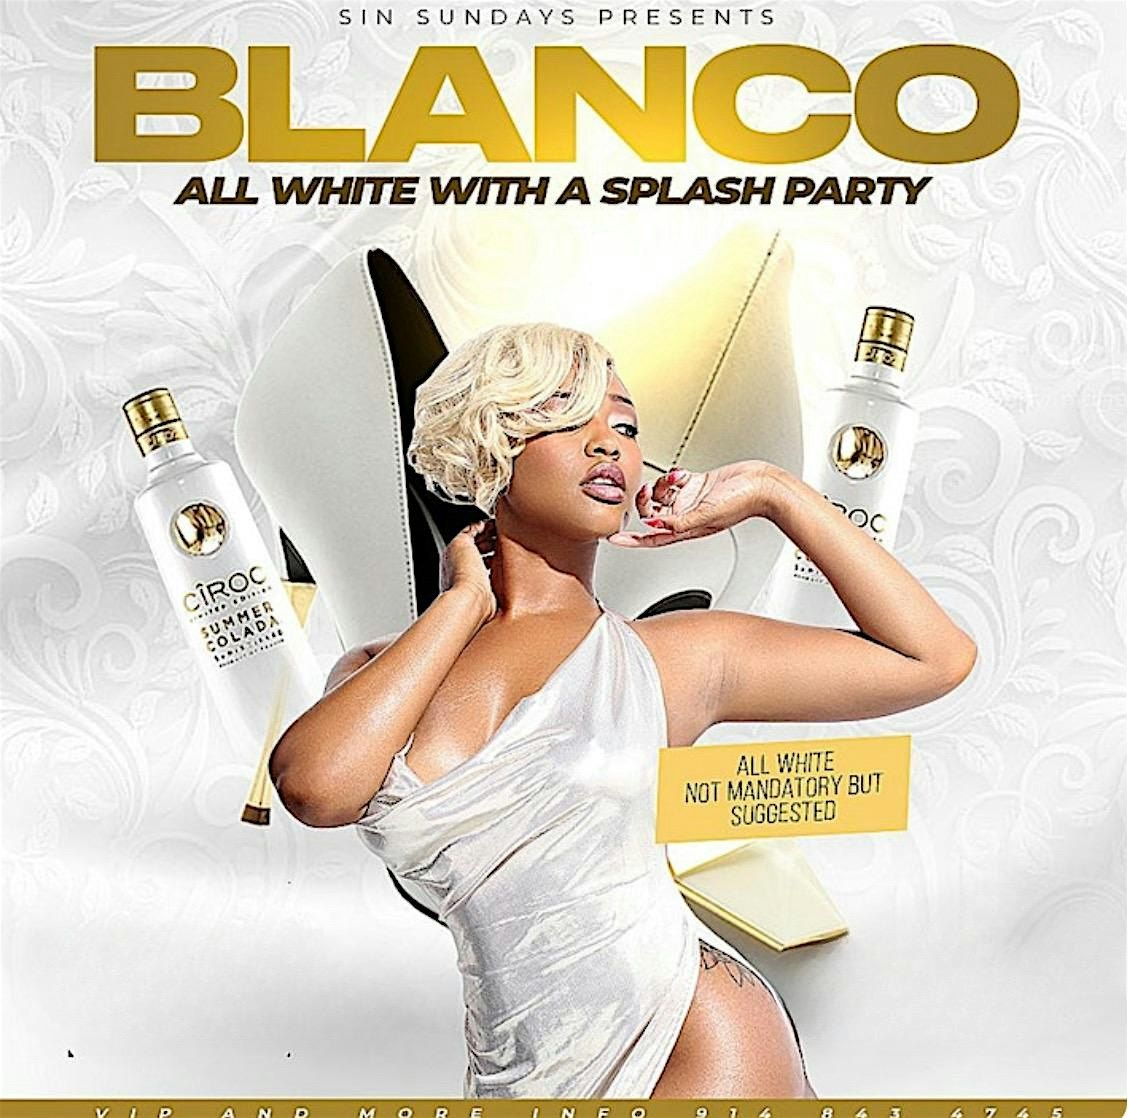 Queen City all white day party!